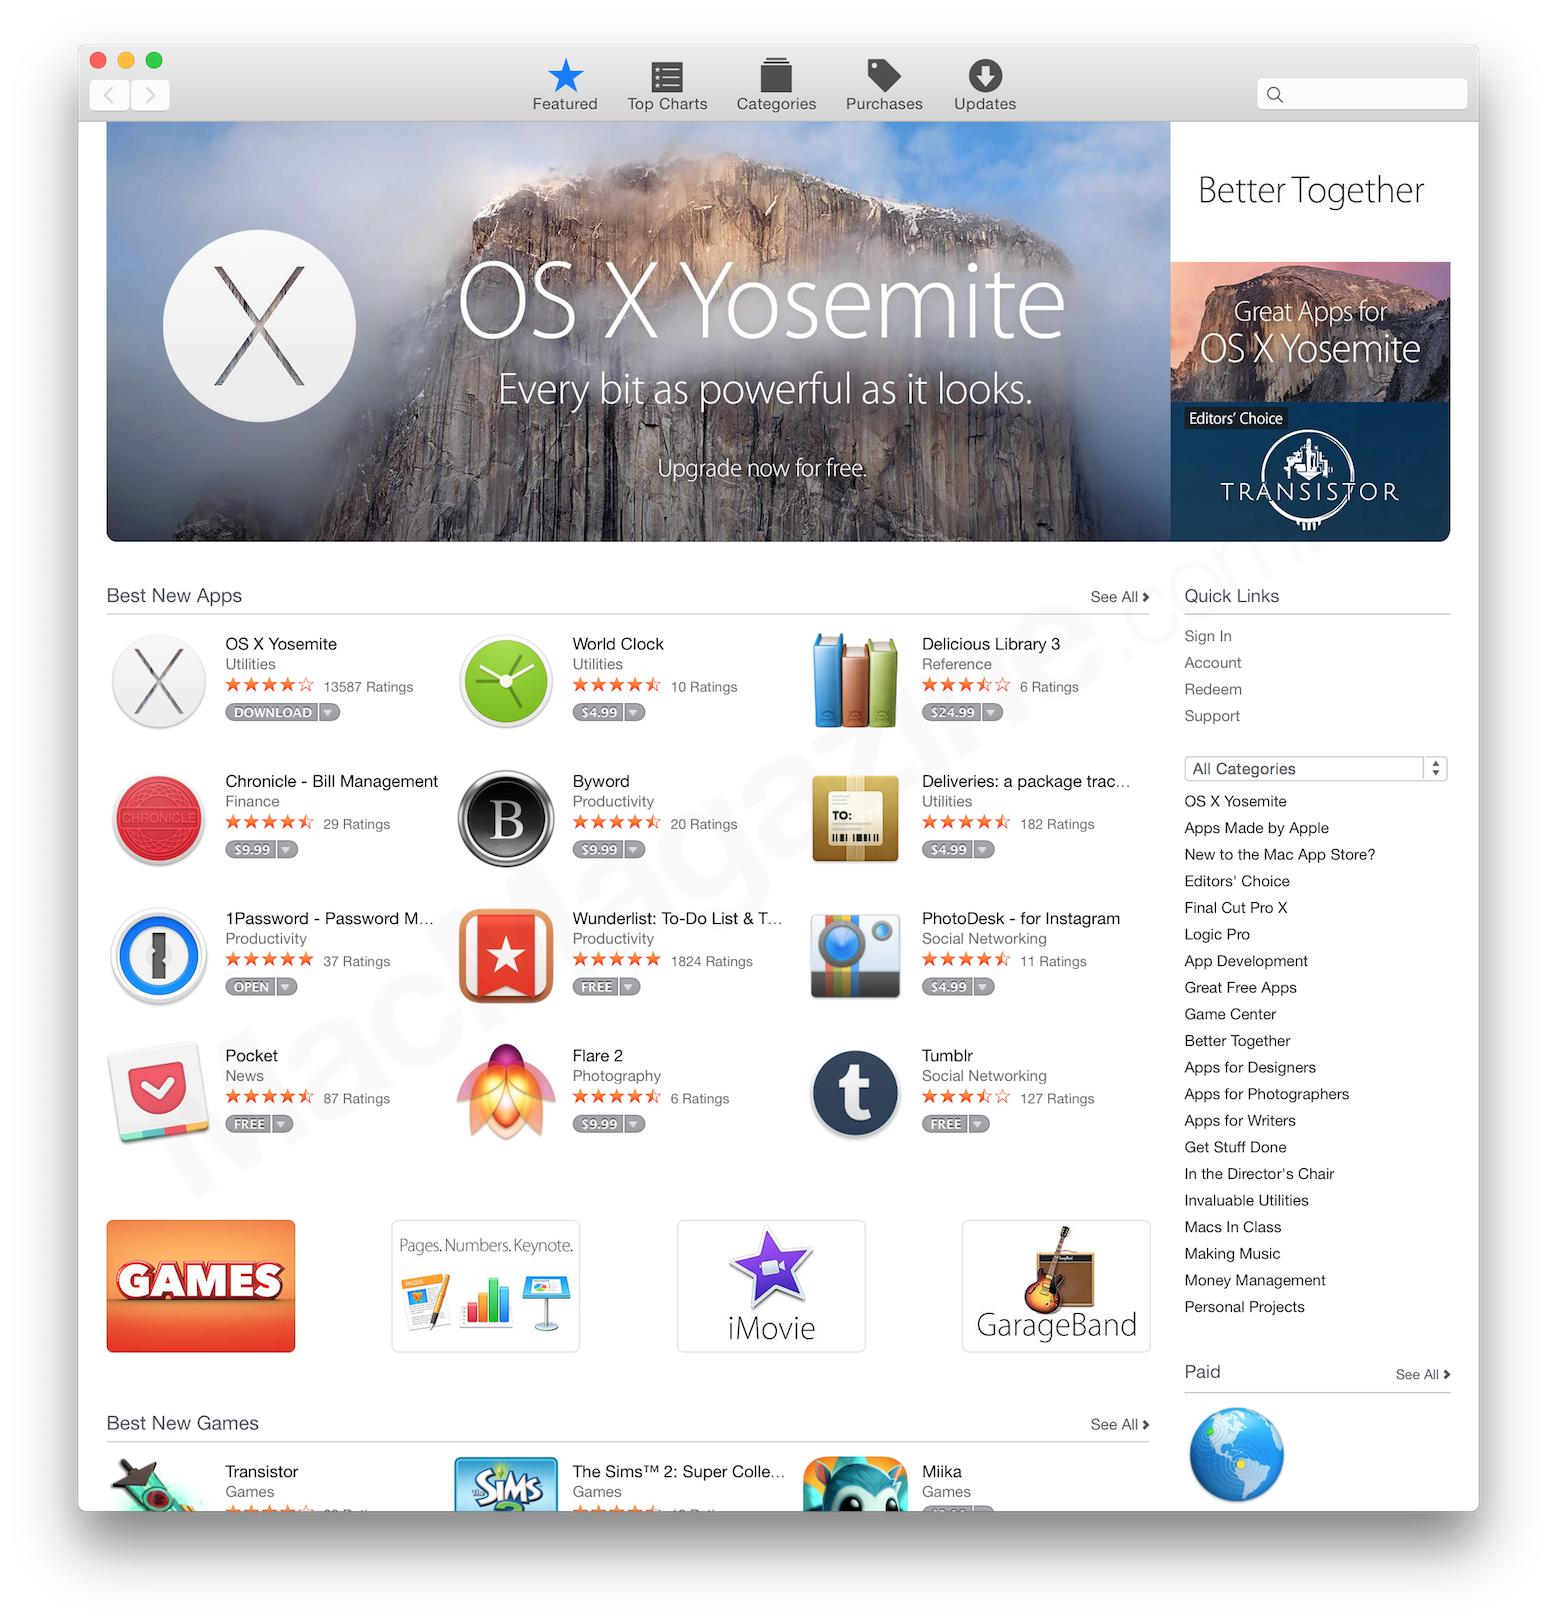 Mac App Store visuals revamped and now complies with OS X Yosemite